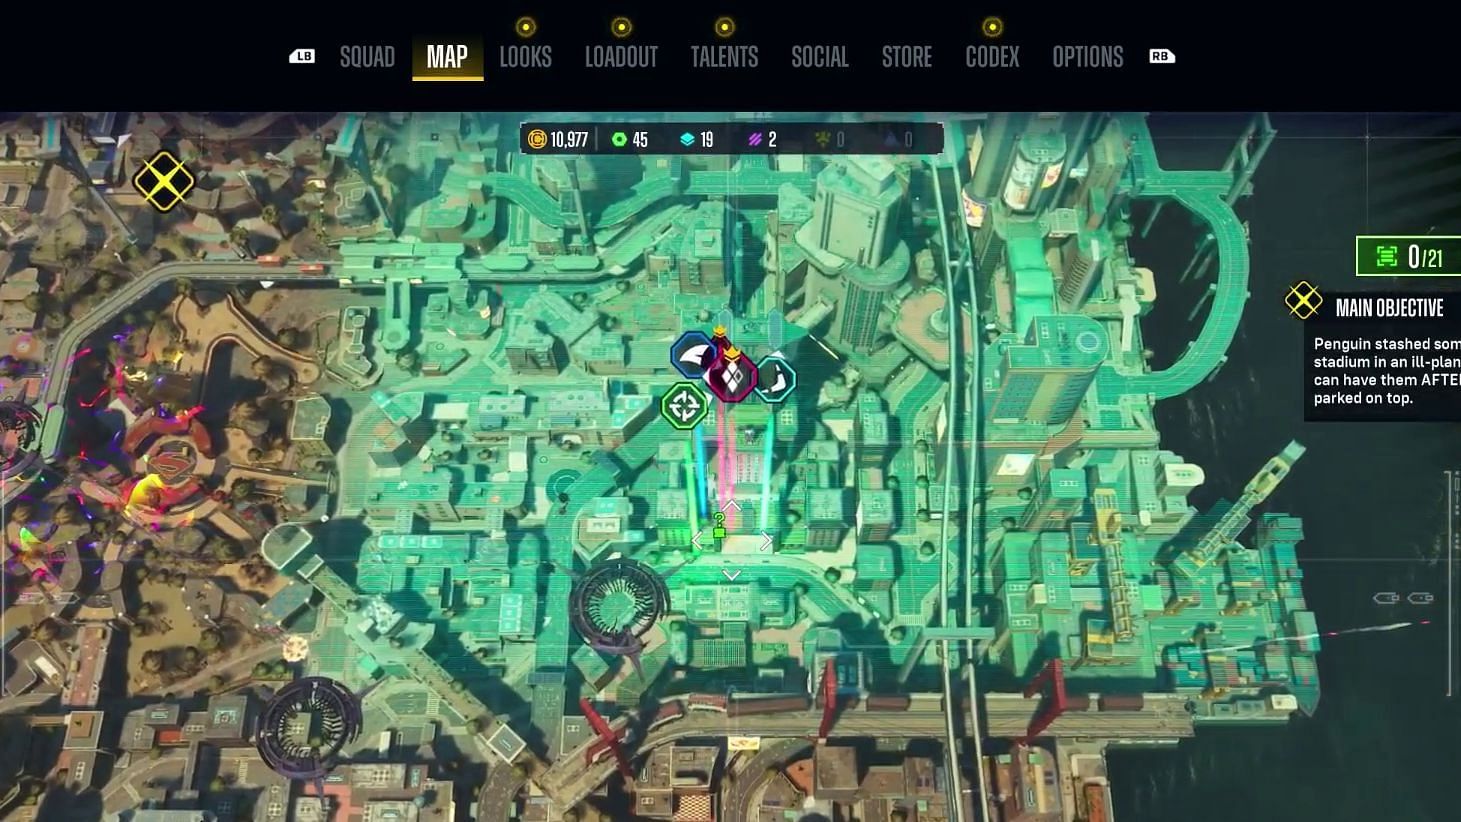 Trophy number 6 spot as marked on the map (Image via YouTube/Pixelz)